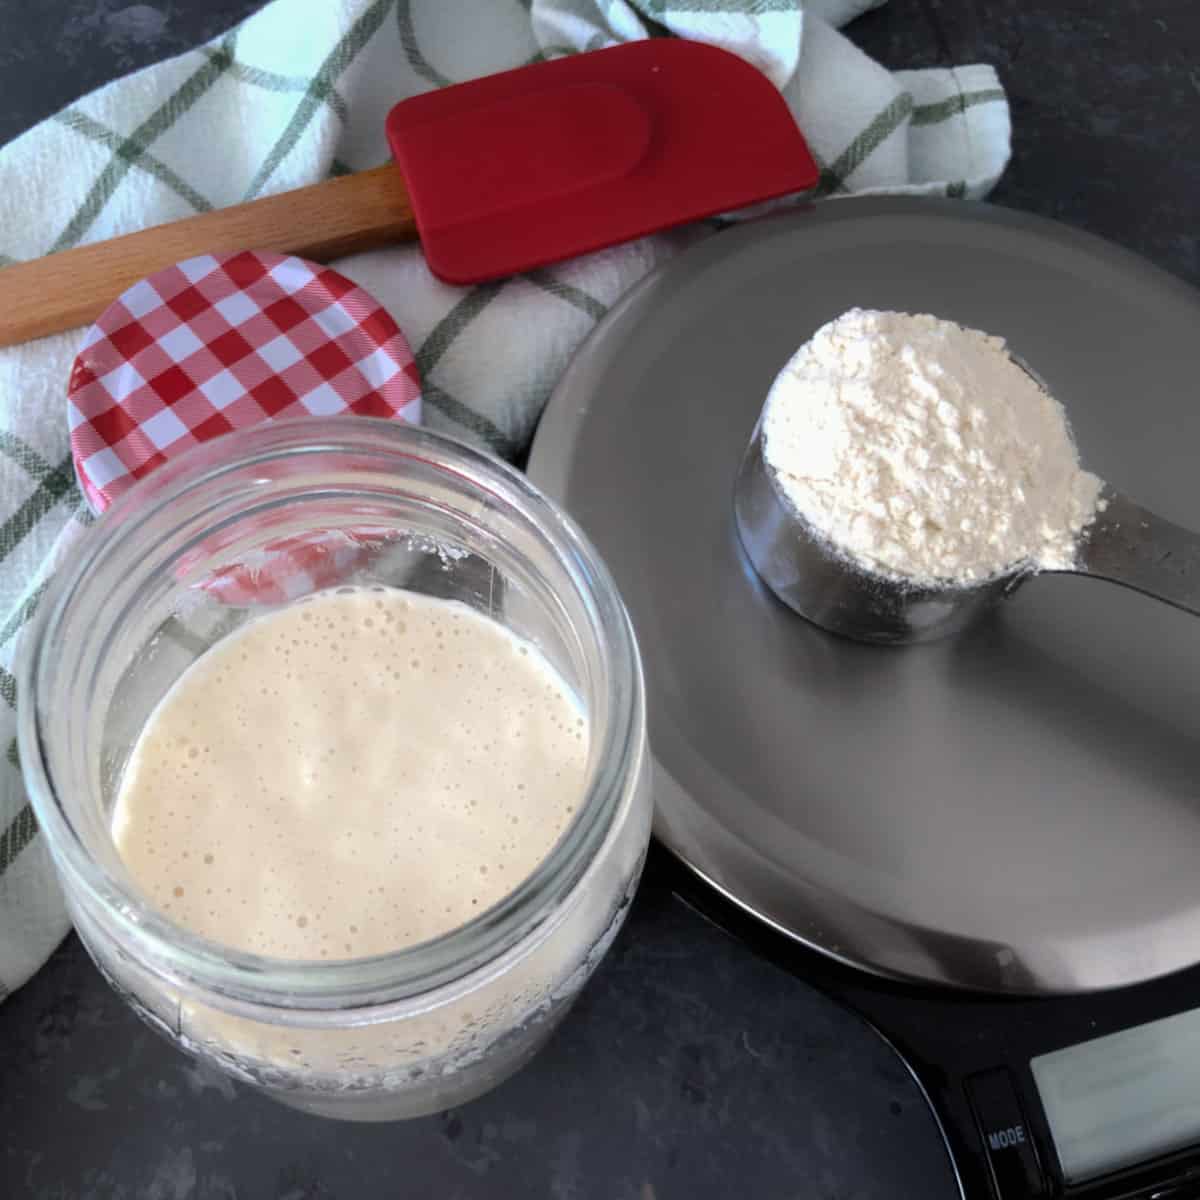 Sourdough starter and a small cup of flour.